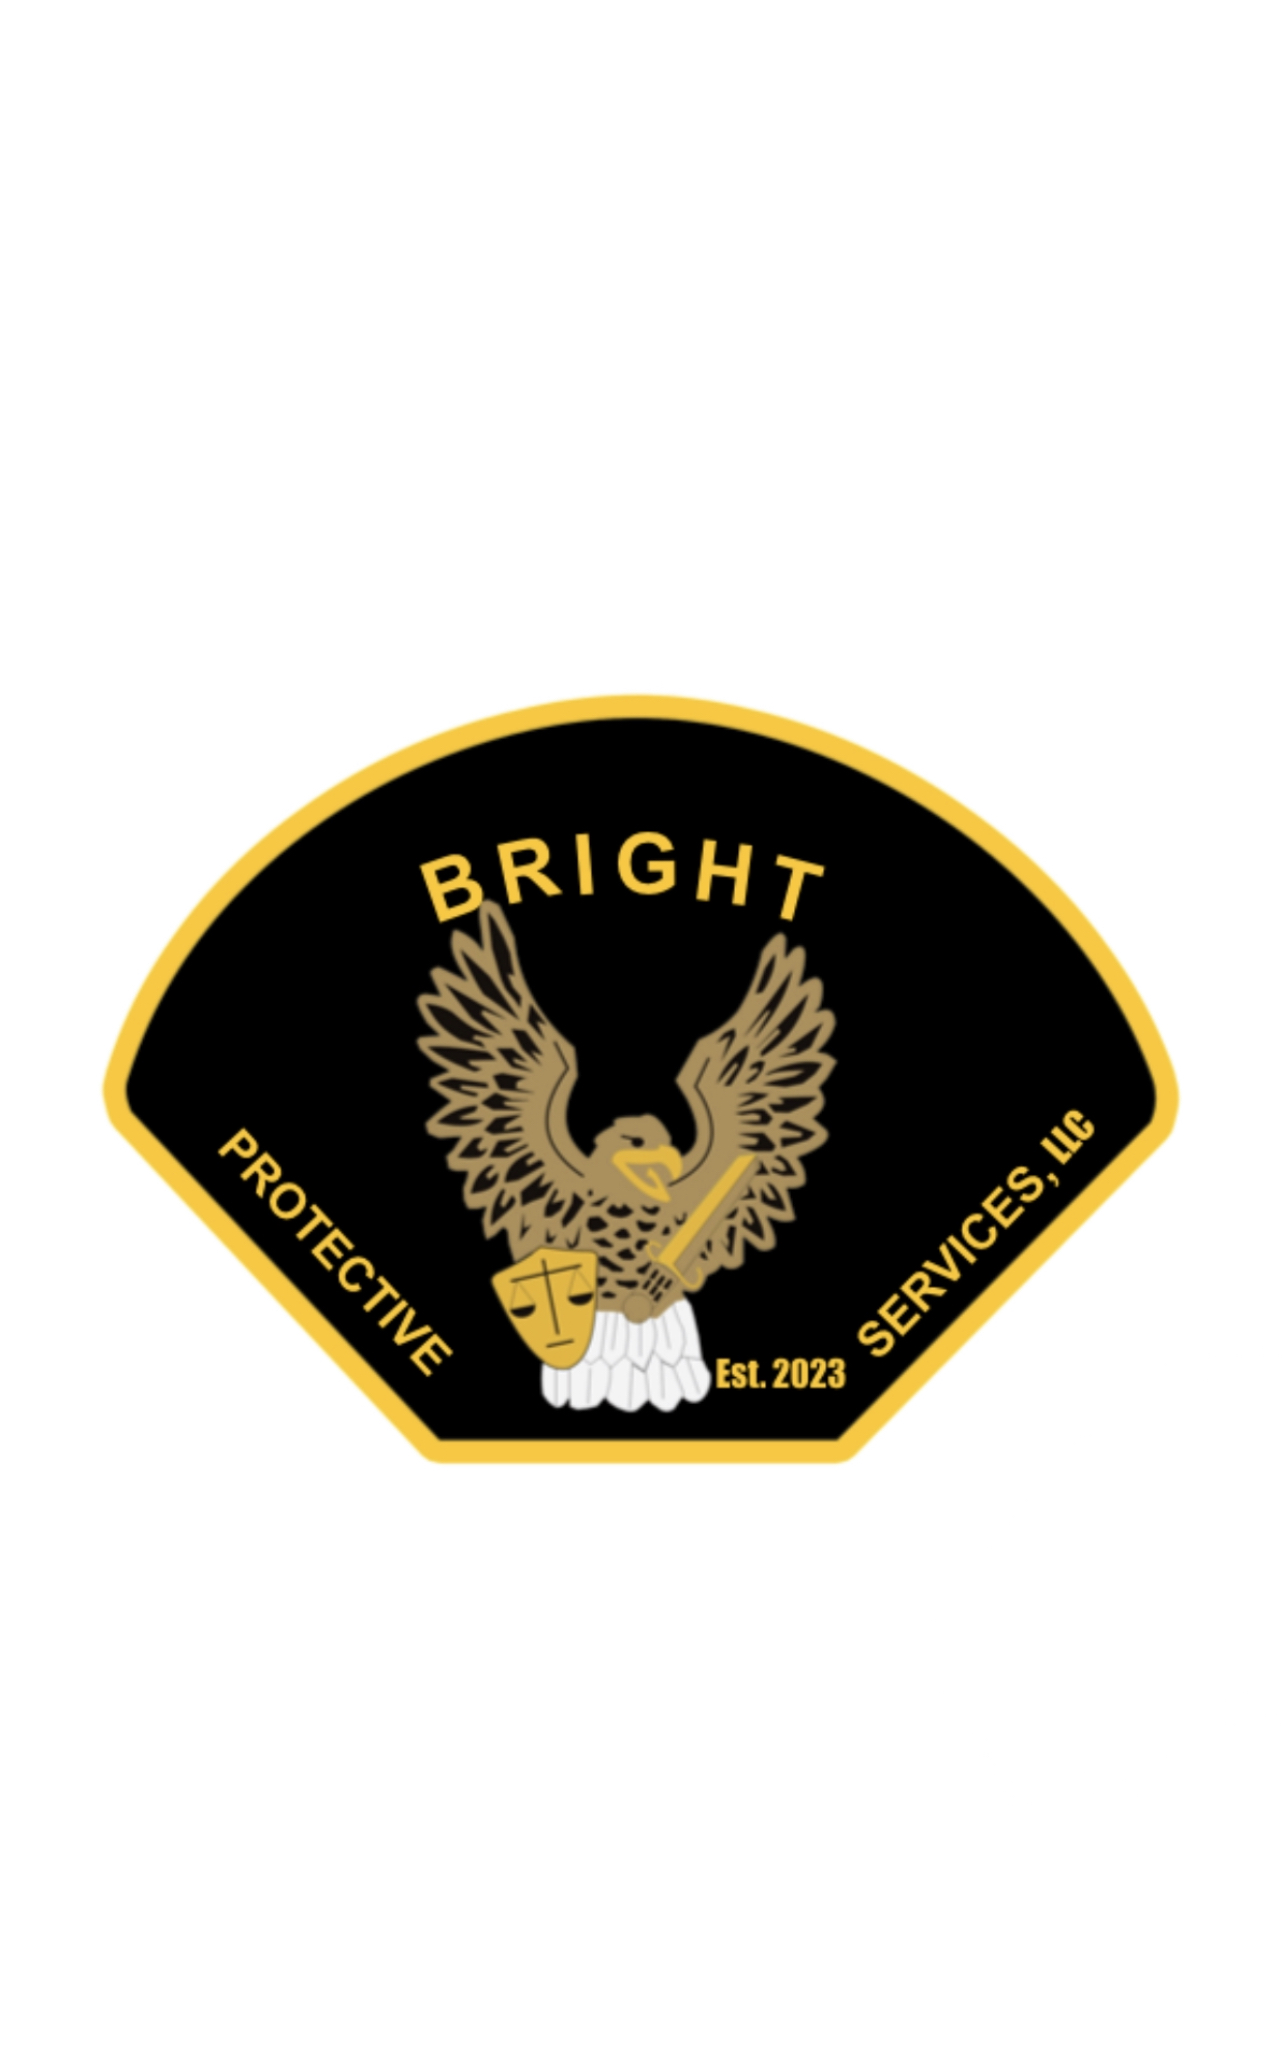 Bright Protective Services